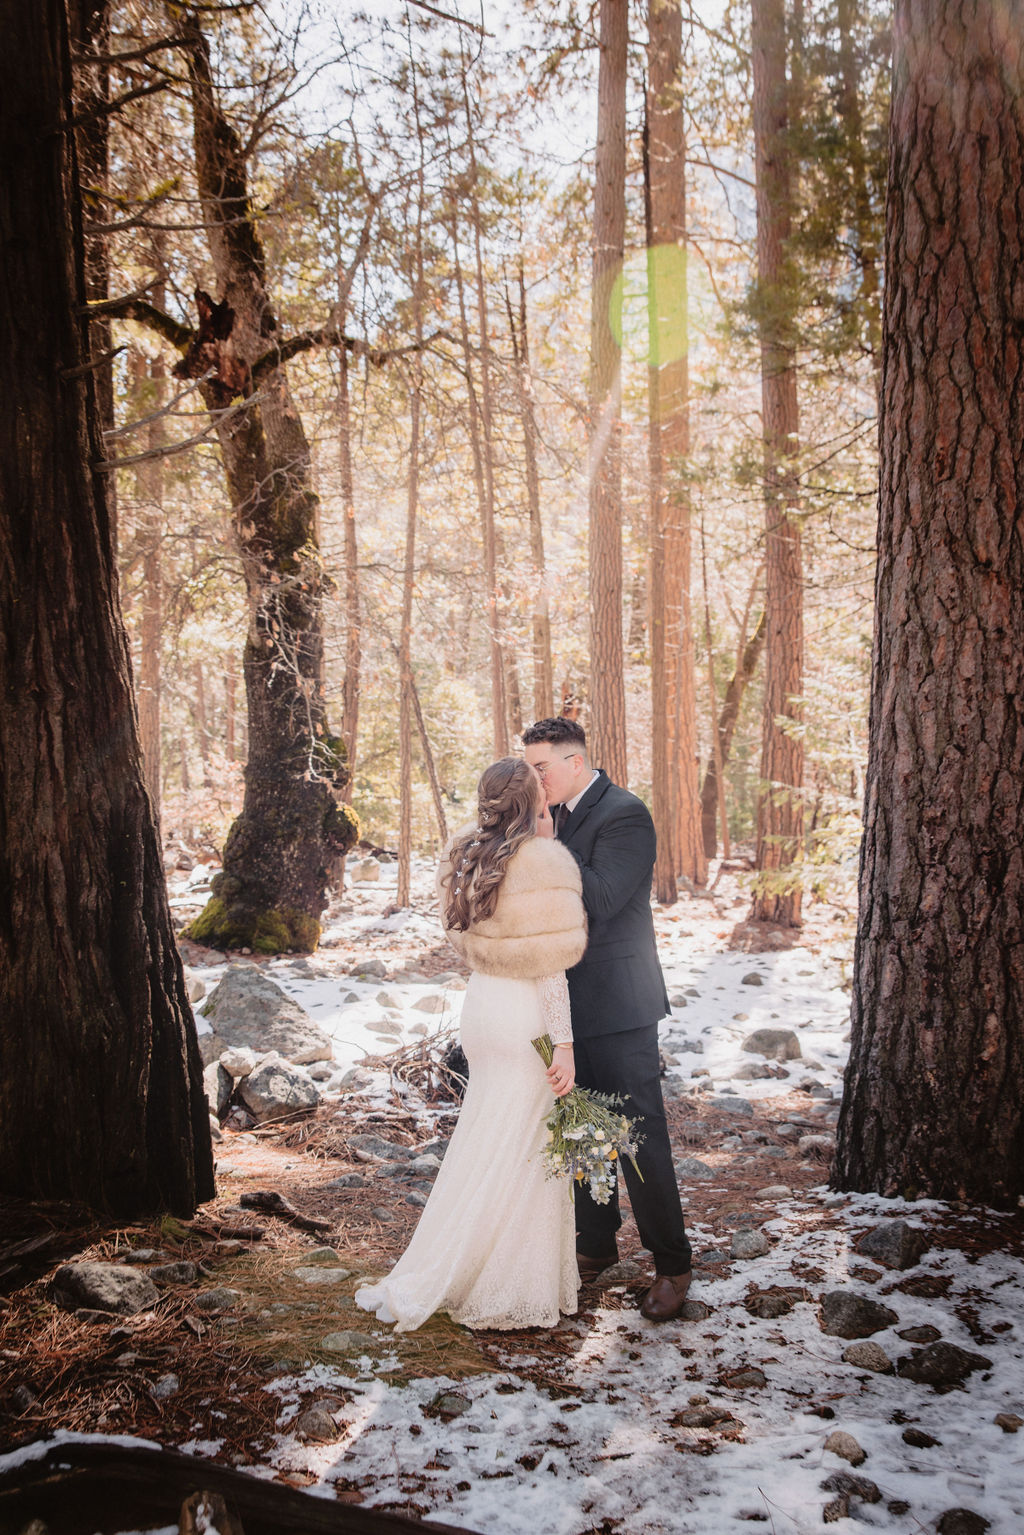 A couple embracing in a snowy forest setting at Yosemite National park.